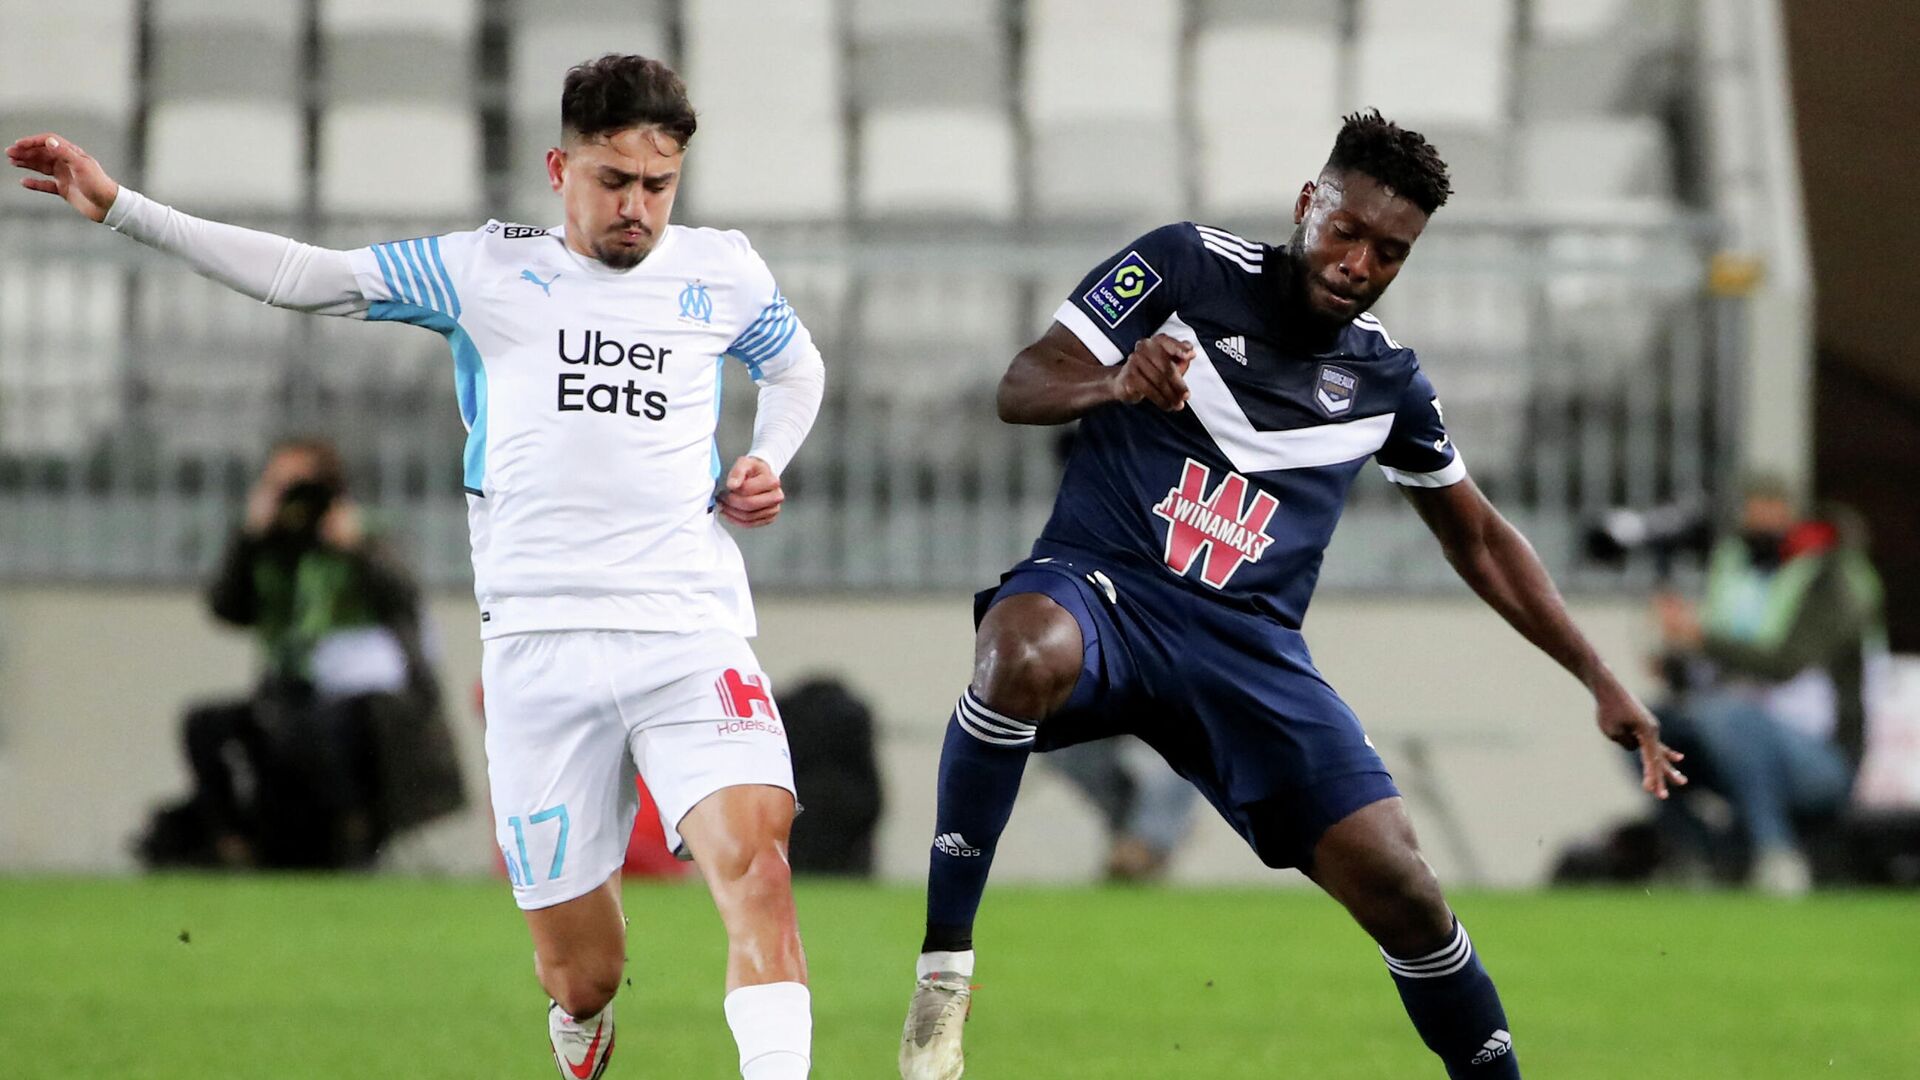 Marseille's Turkish forward Cengiz Under (L) fights for the ball with Bordeaux' French defender Enock Kwateng during the French L1 football match between Girondins de Bordeaux and Olympique de Marseille (OM) at the Matmut stadium in Bordeaux, southwestern France, on January 7, 2022. (Photo by ROMAIN PERROCHEAU / AFP) - РИА Новости, 1920, 08.01.2022